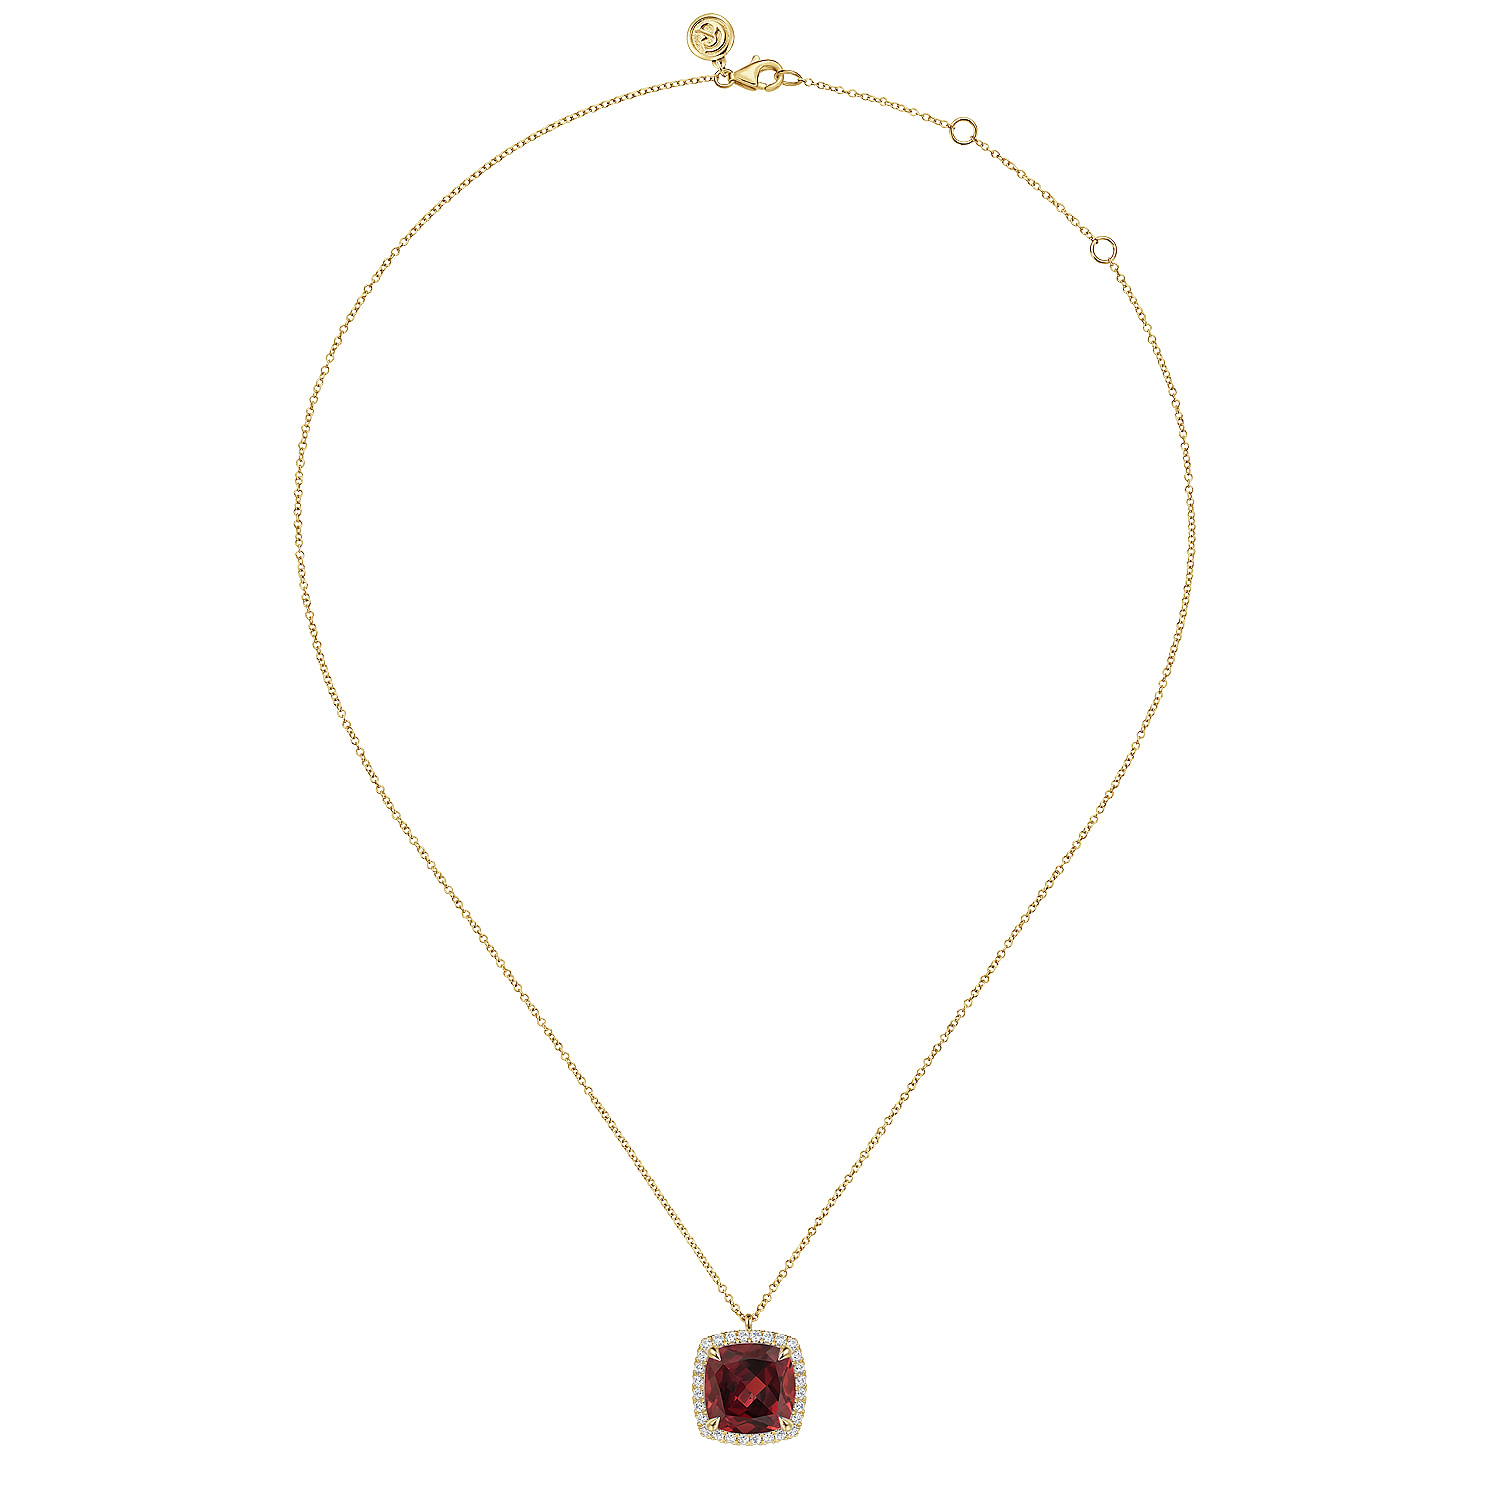 14K Yellow Gold Diamond and Garnet Cushion Cut Necklace With Flower Pattern J-Back